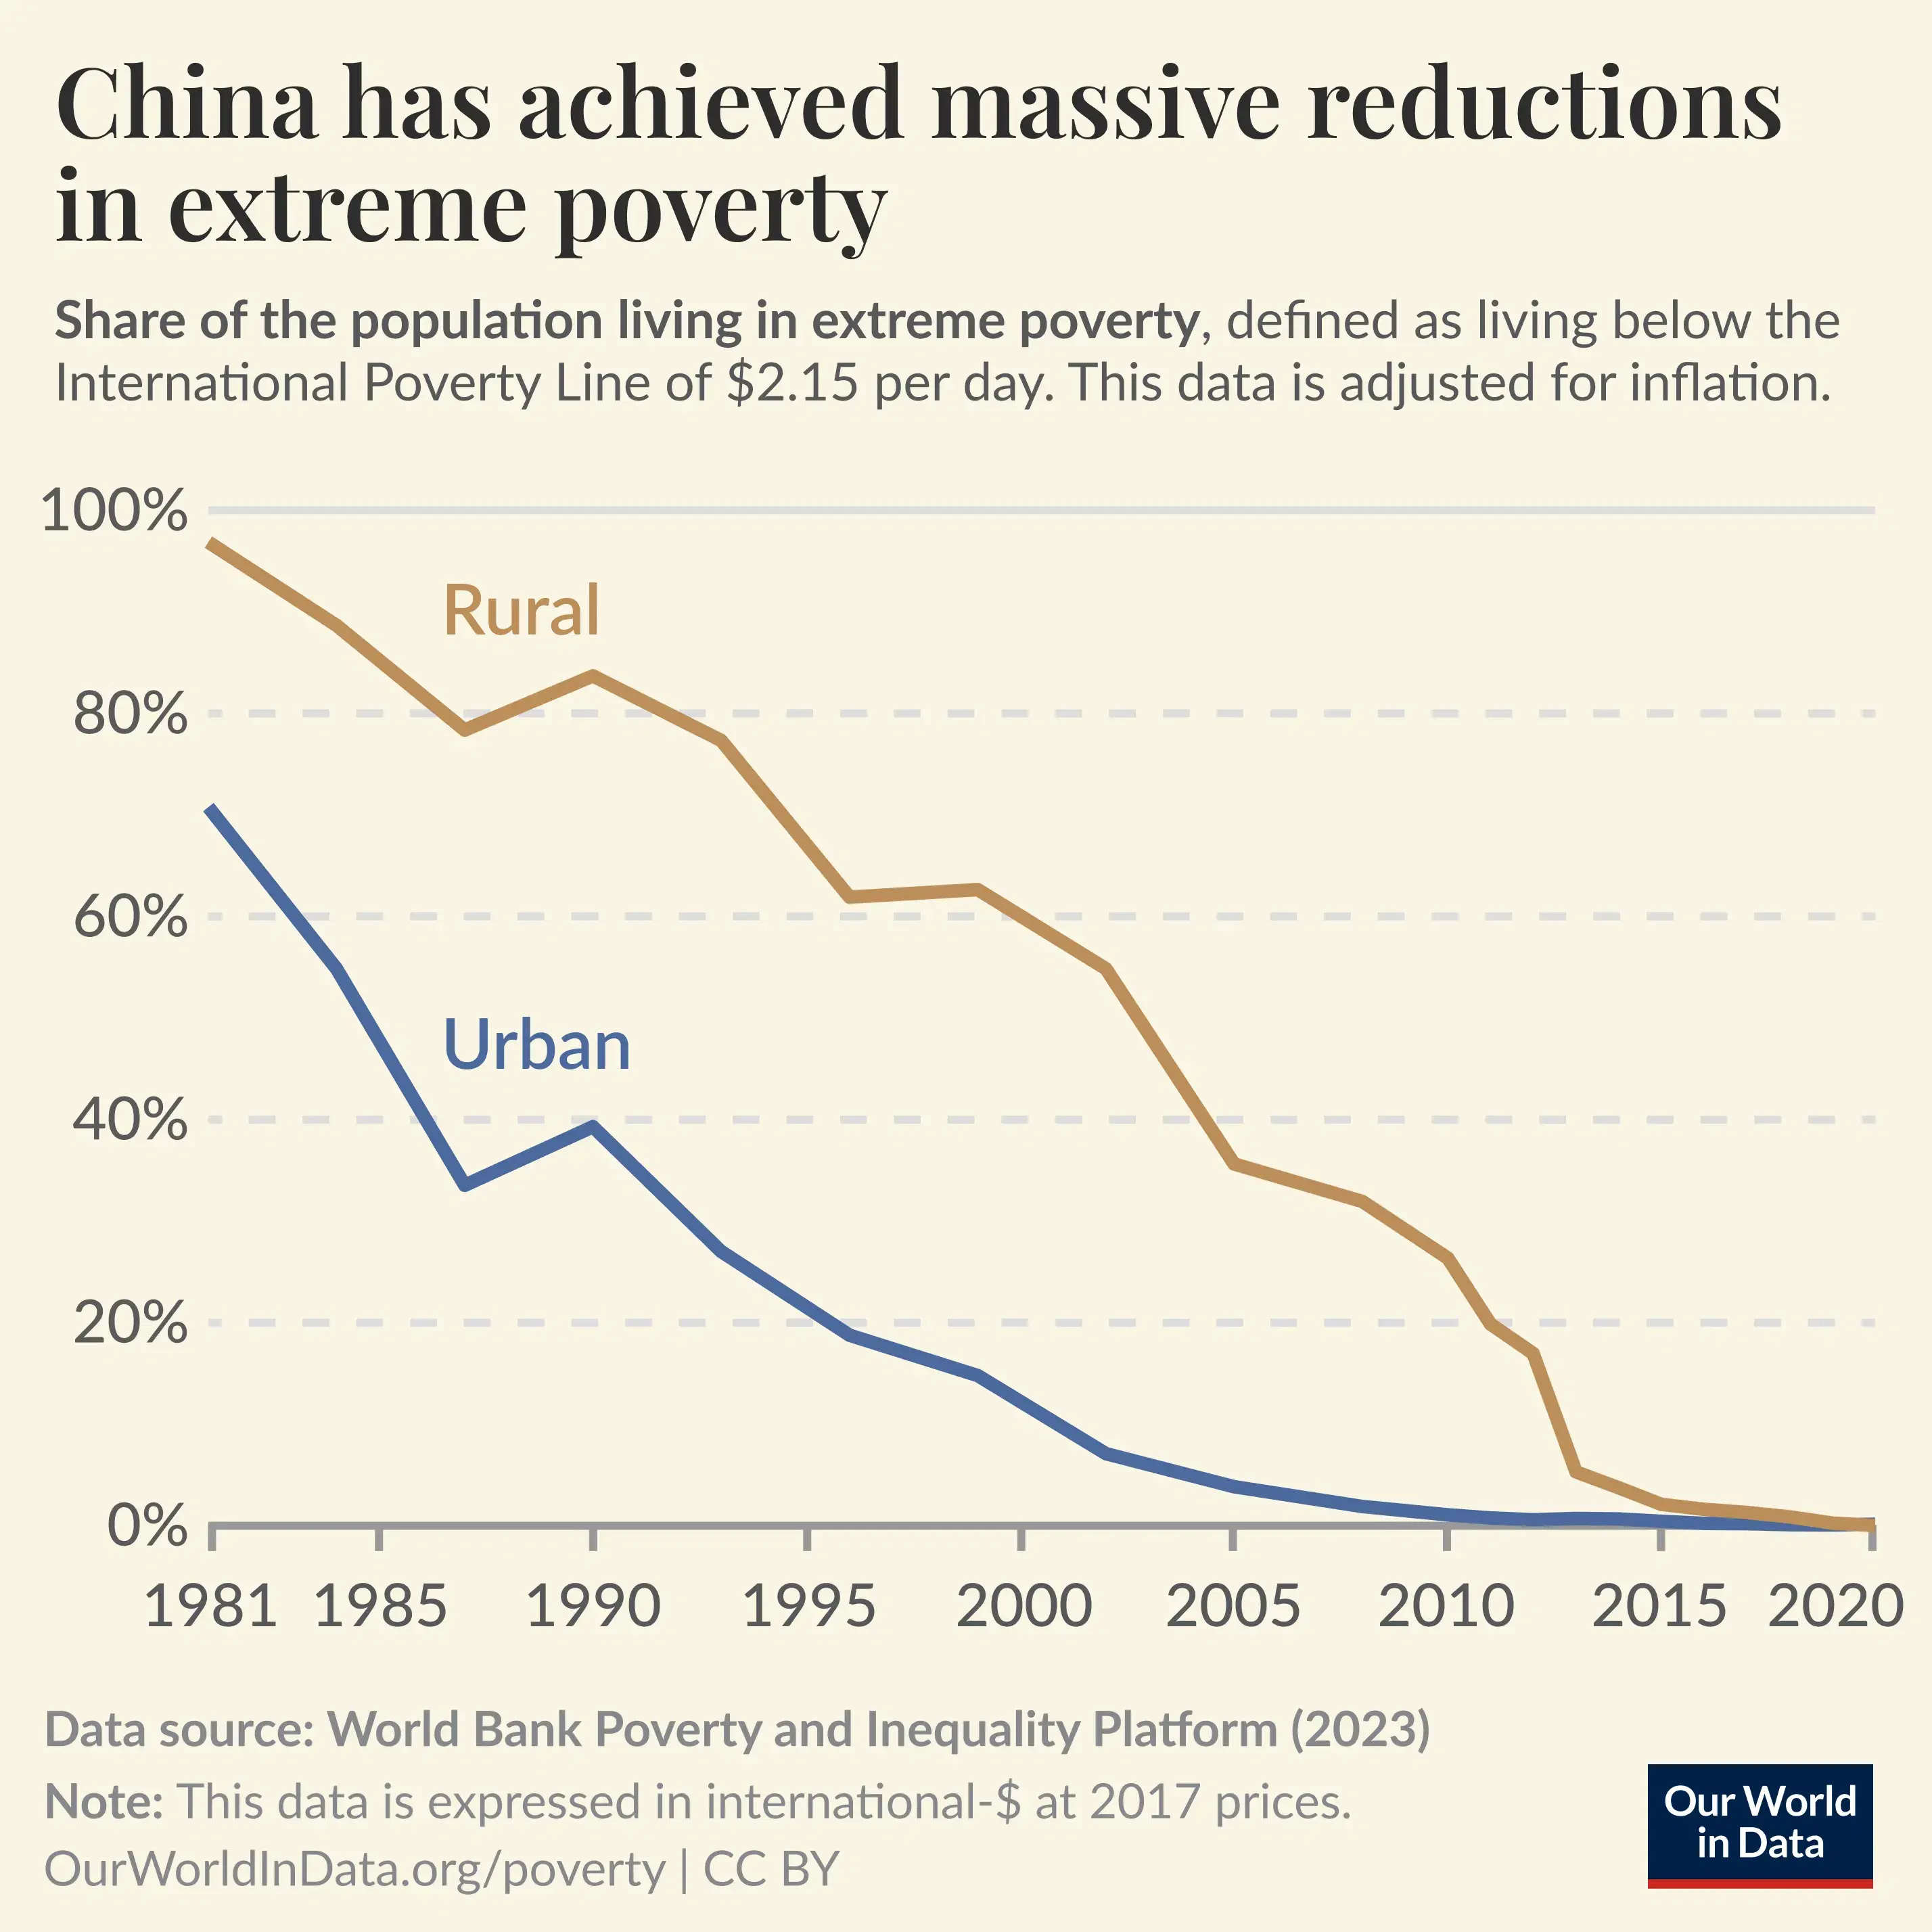 Over the Last Four Decades, Extreme Poverty has Plummeted in China